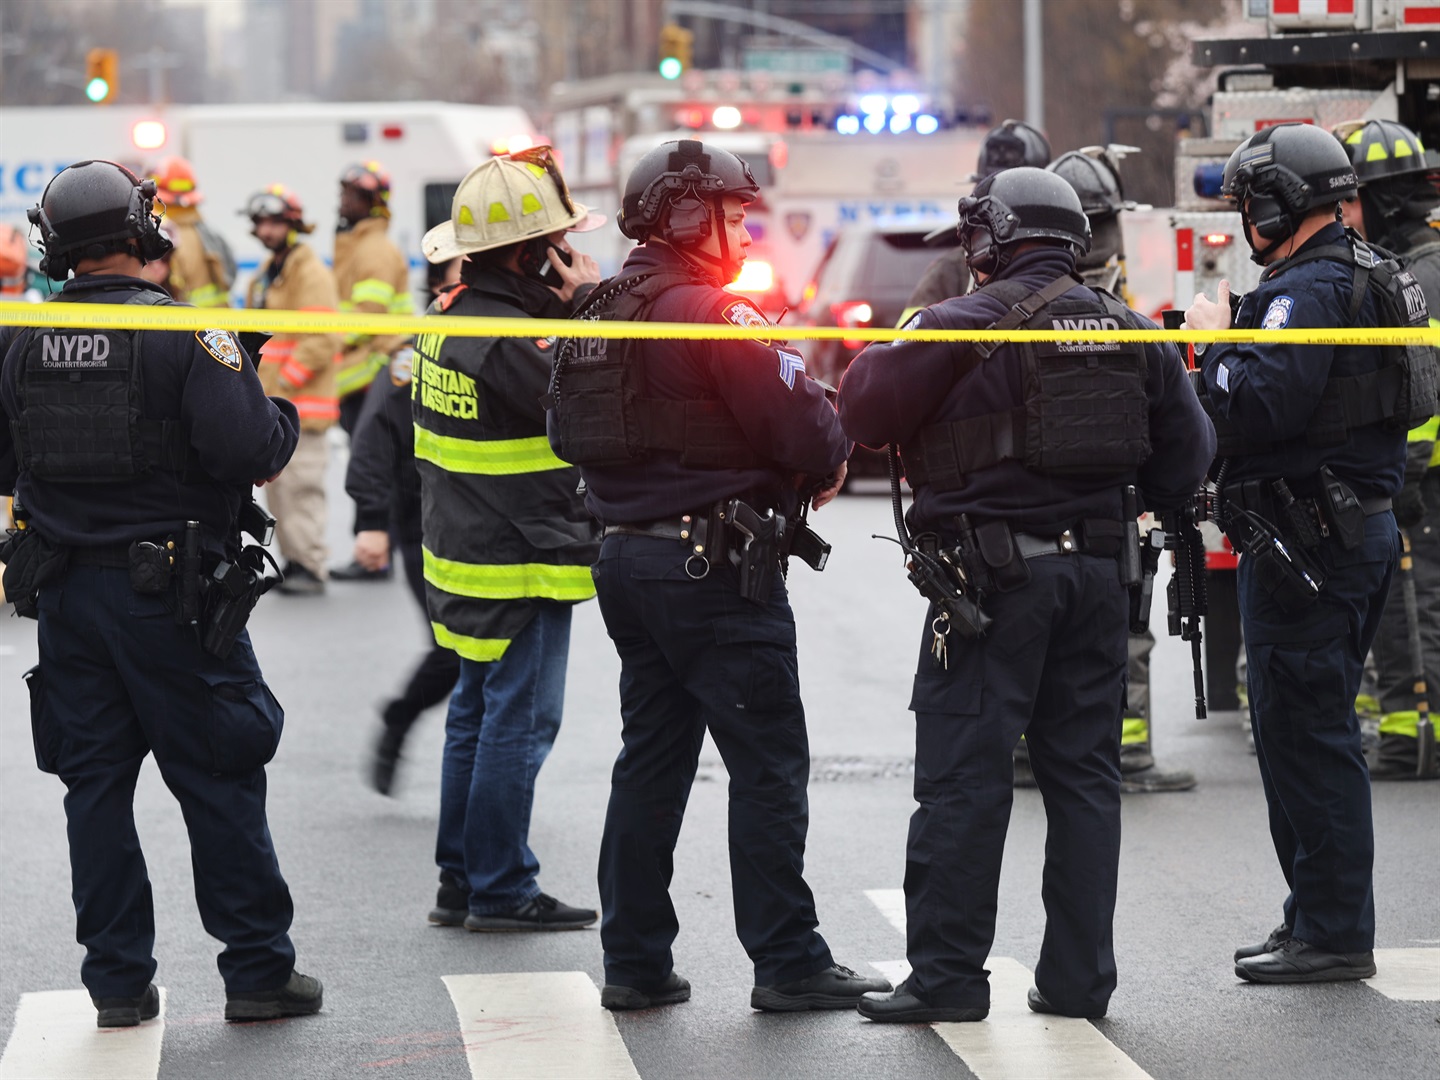 Police and emergency responders gather at the site of a shooting at a New York City subway station on April 12, 2022. Spencer Platt/Getty Images